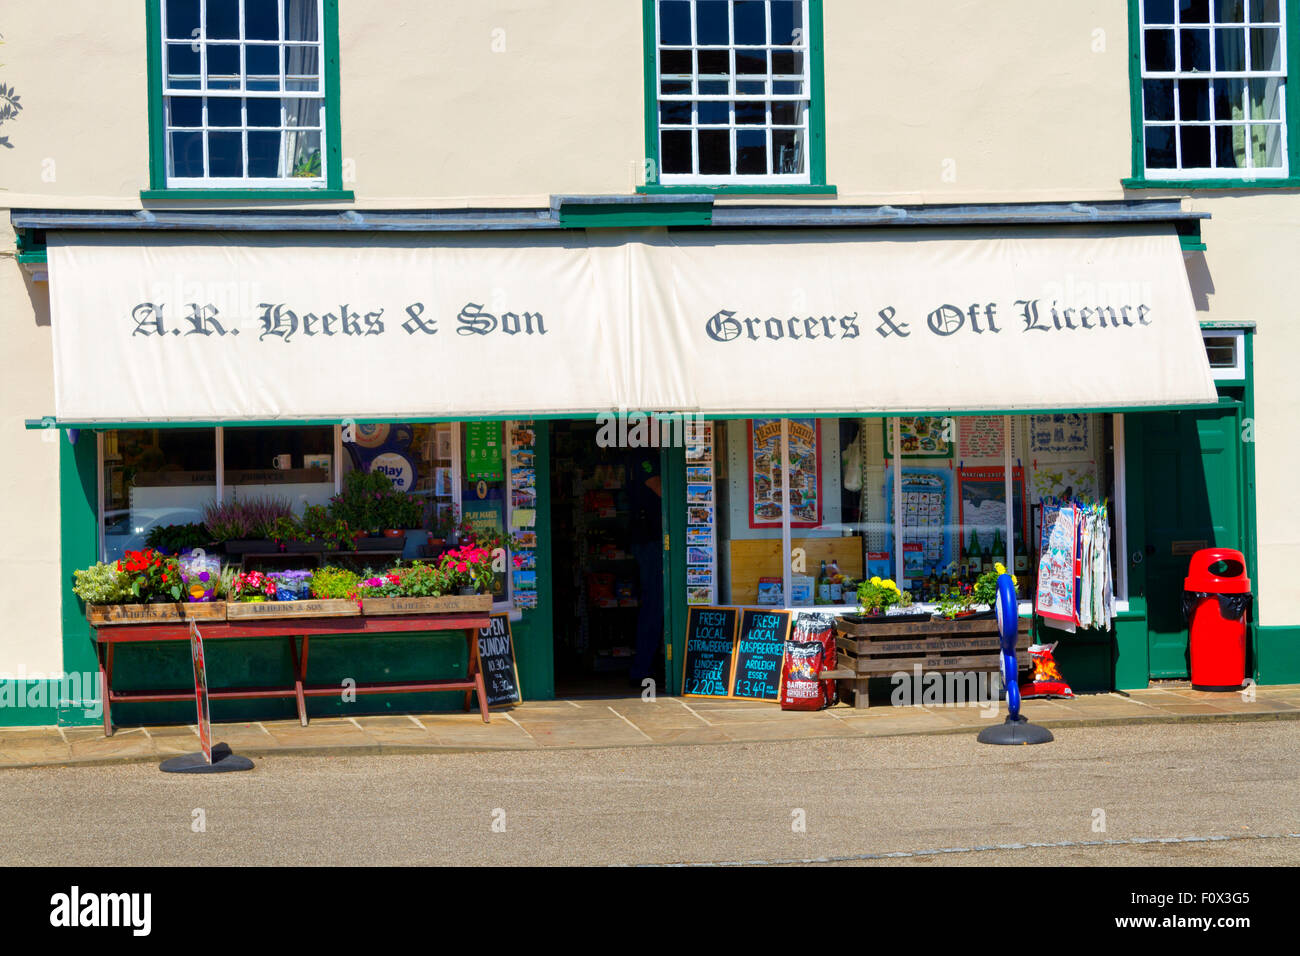 A R Leeks & Son, Grocers & Off Licence, Market Place, Lavenham, Suffolk, UK Stock Photo